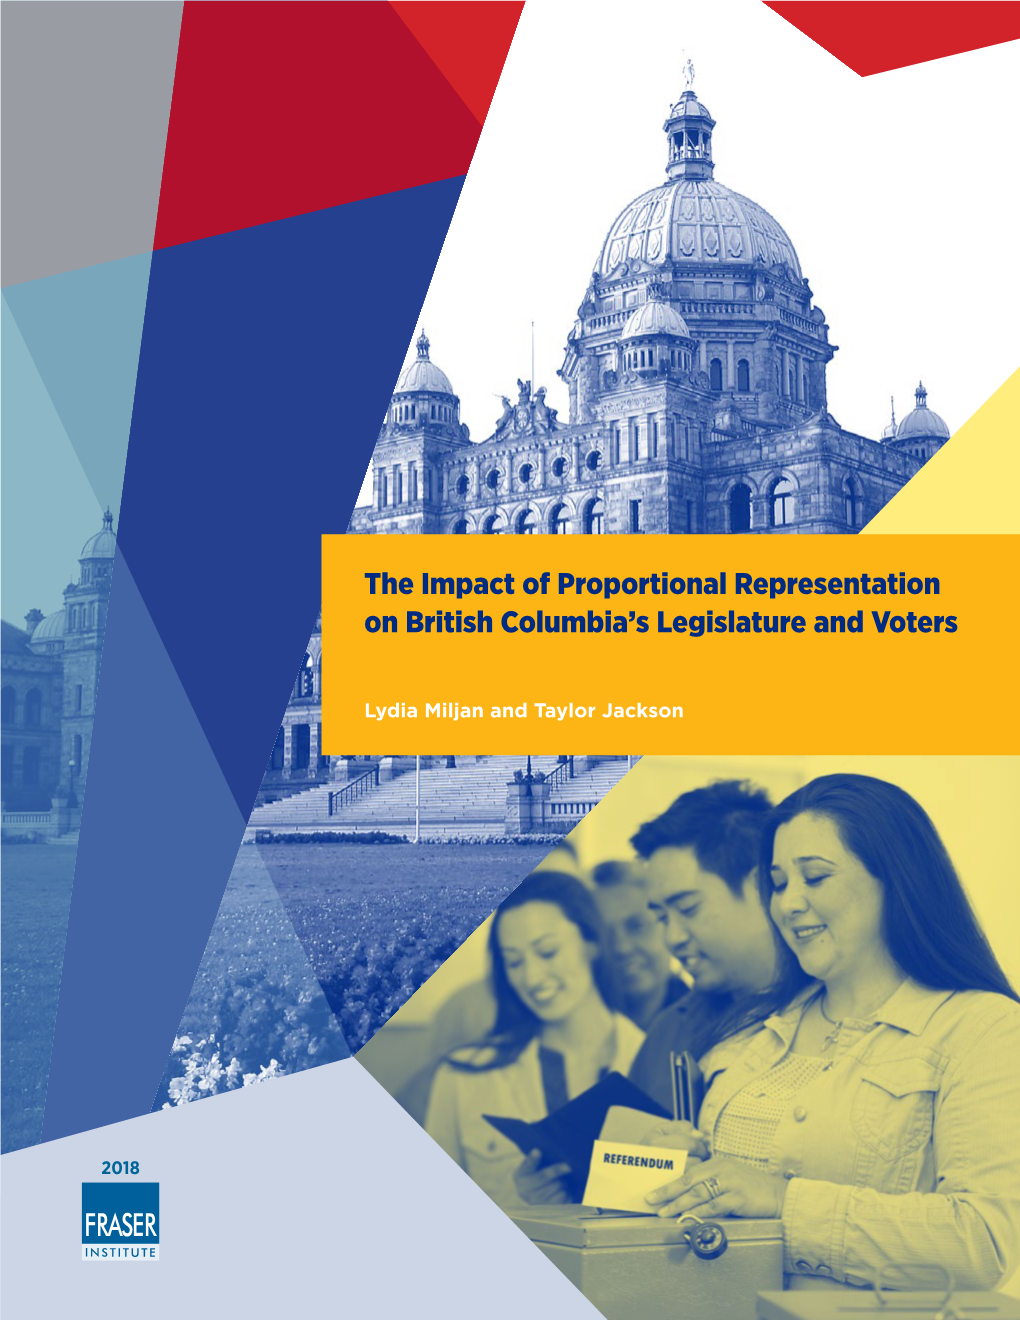 The Impact of Proportional Representation on British Columbia’S Legislature and Voters